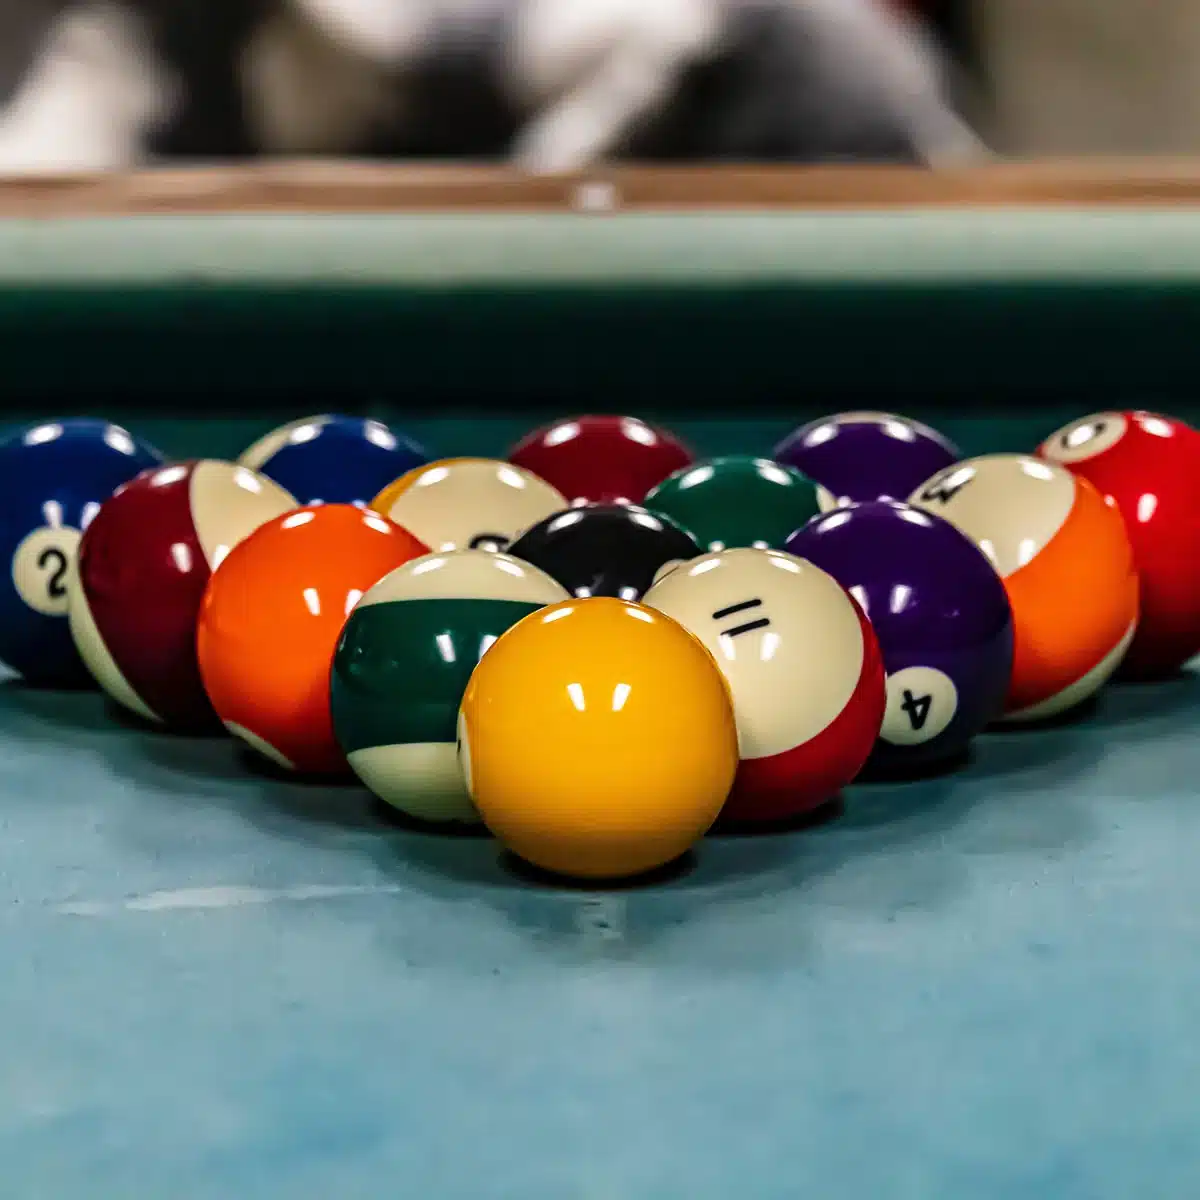 How to clean billiards balls